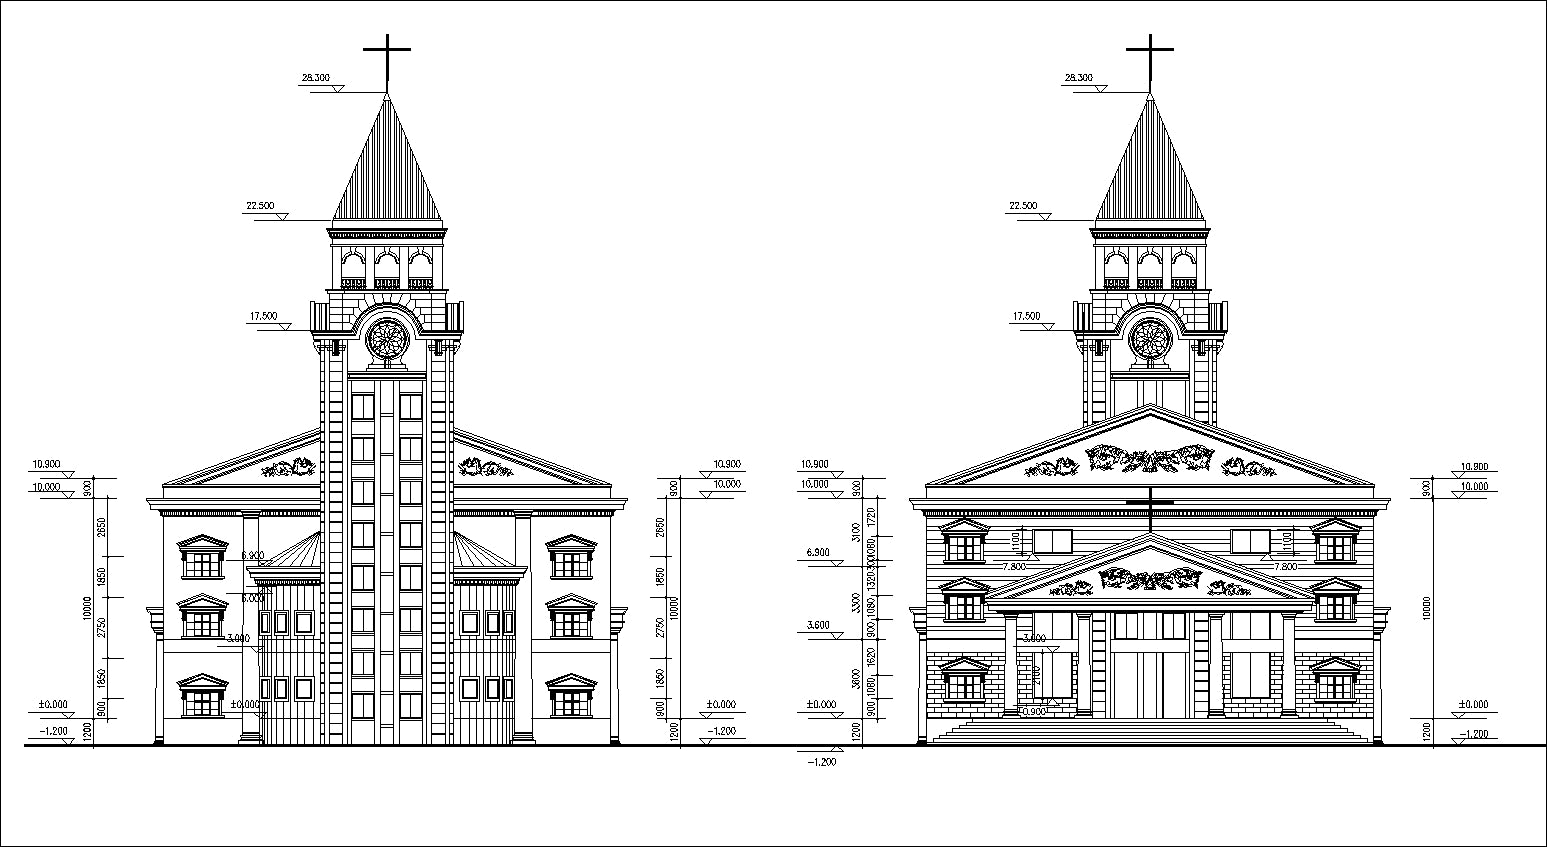 【Architecture CAD Projects】Church Architecture Design CAD Blocks,Plans,Layout V2